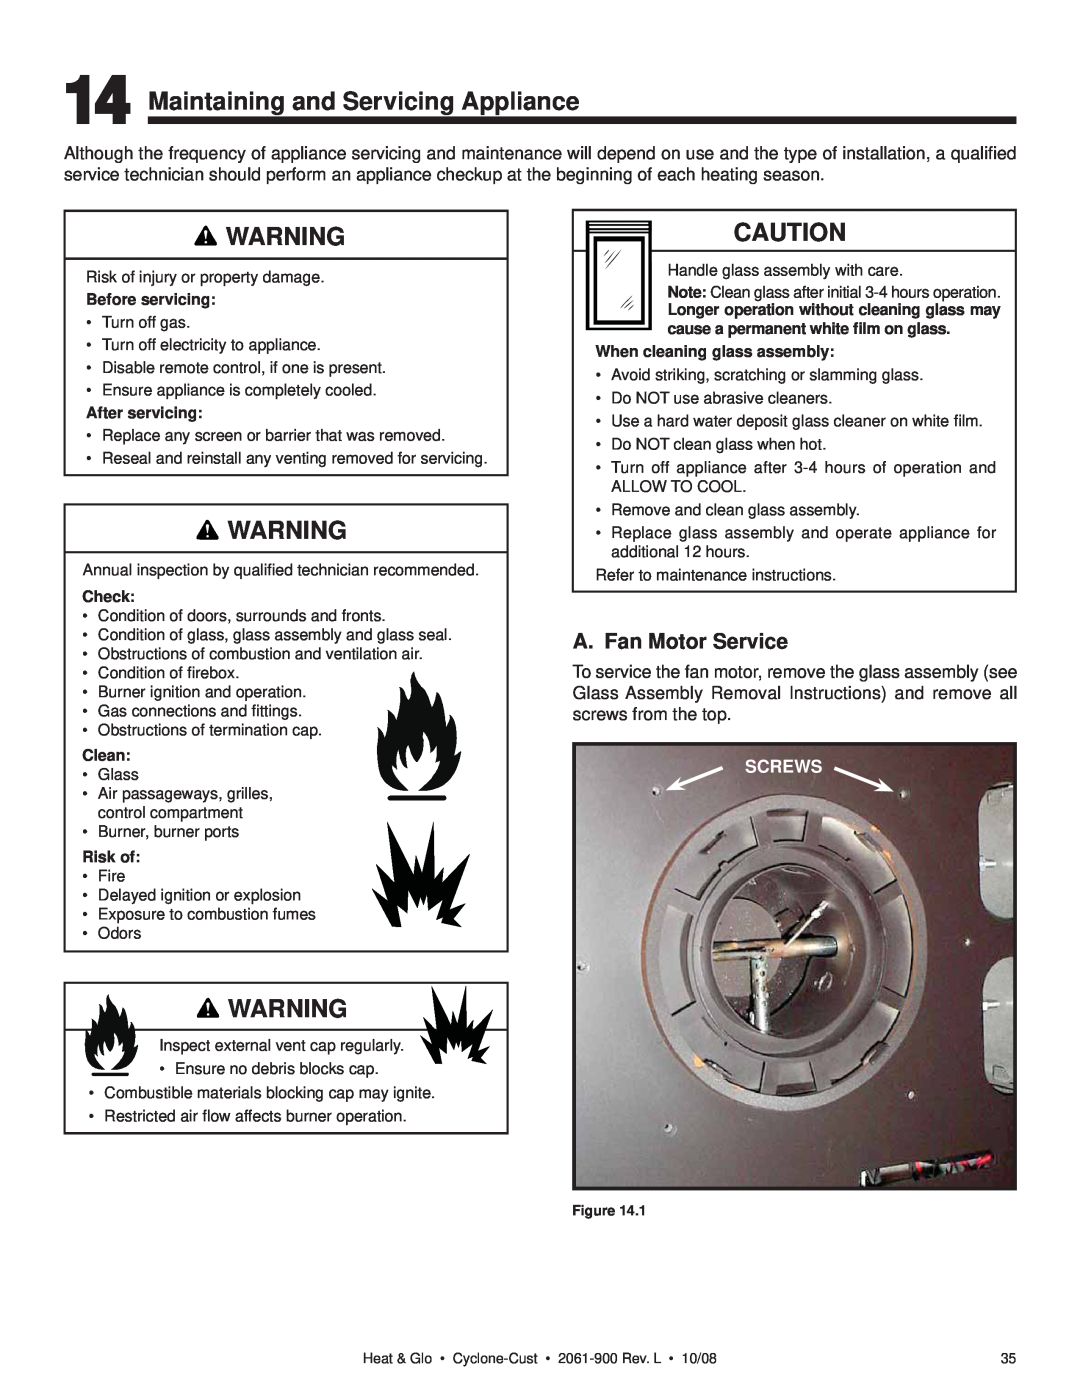 Hearth and Home Technologies Cyclone-Cust owner manual Maintaining and Servicing Appliance, A. Fan Motor Service, Screws 